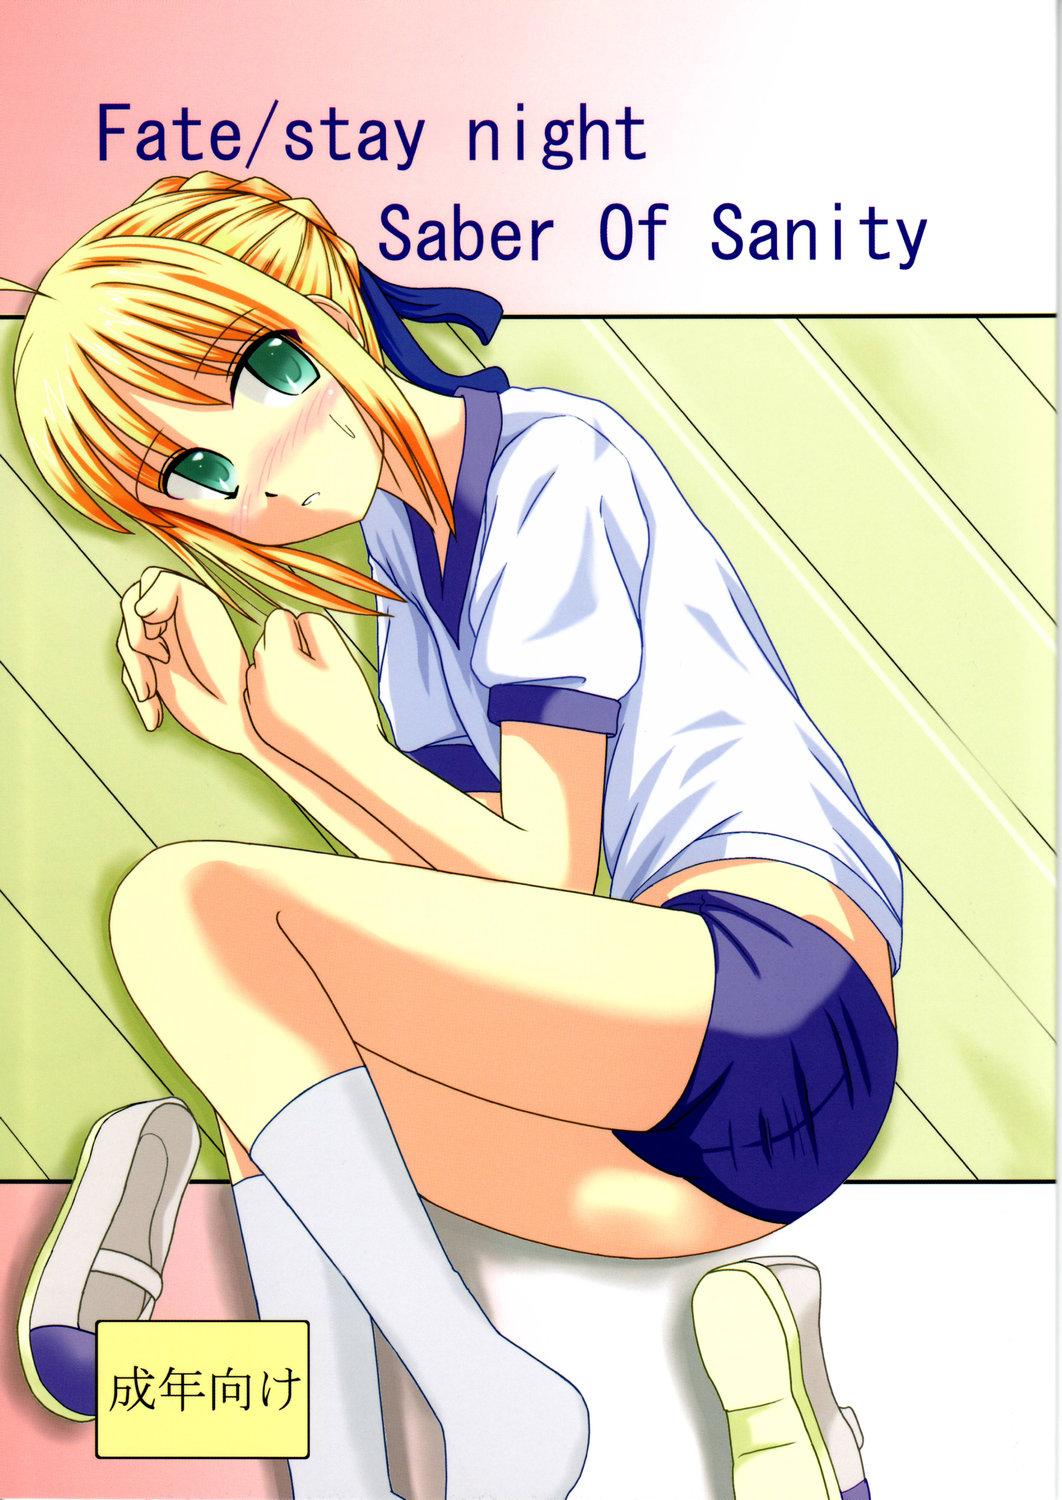 Tanga Saber Of Sanity - Fate stay night Shower - Picture 1